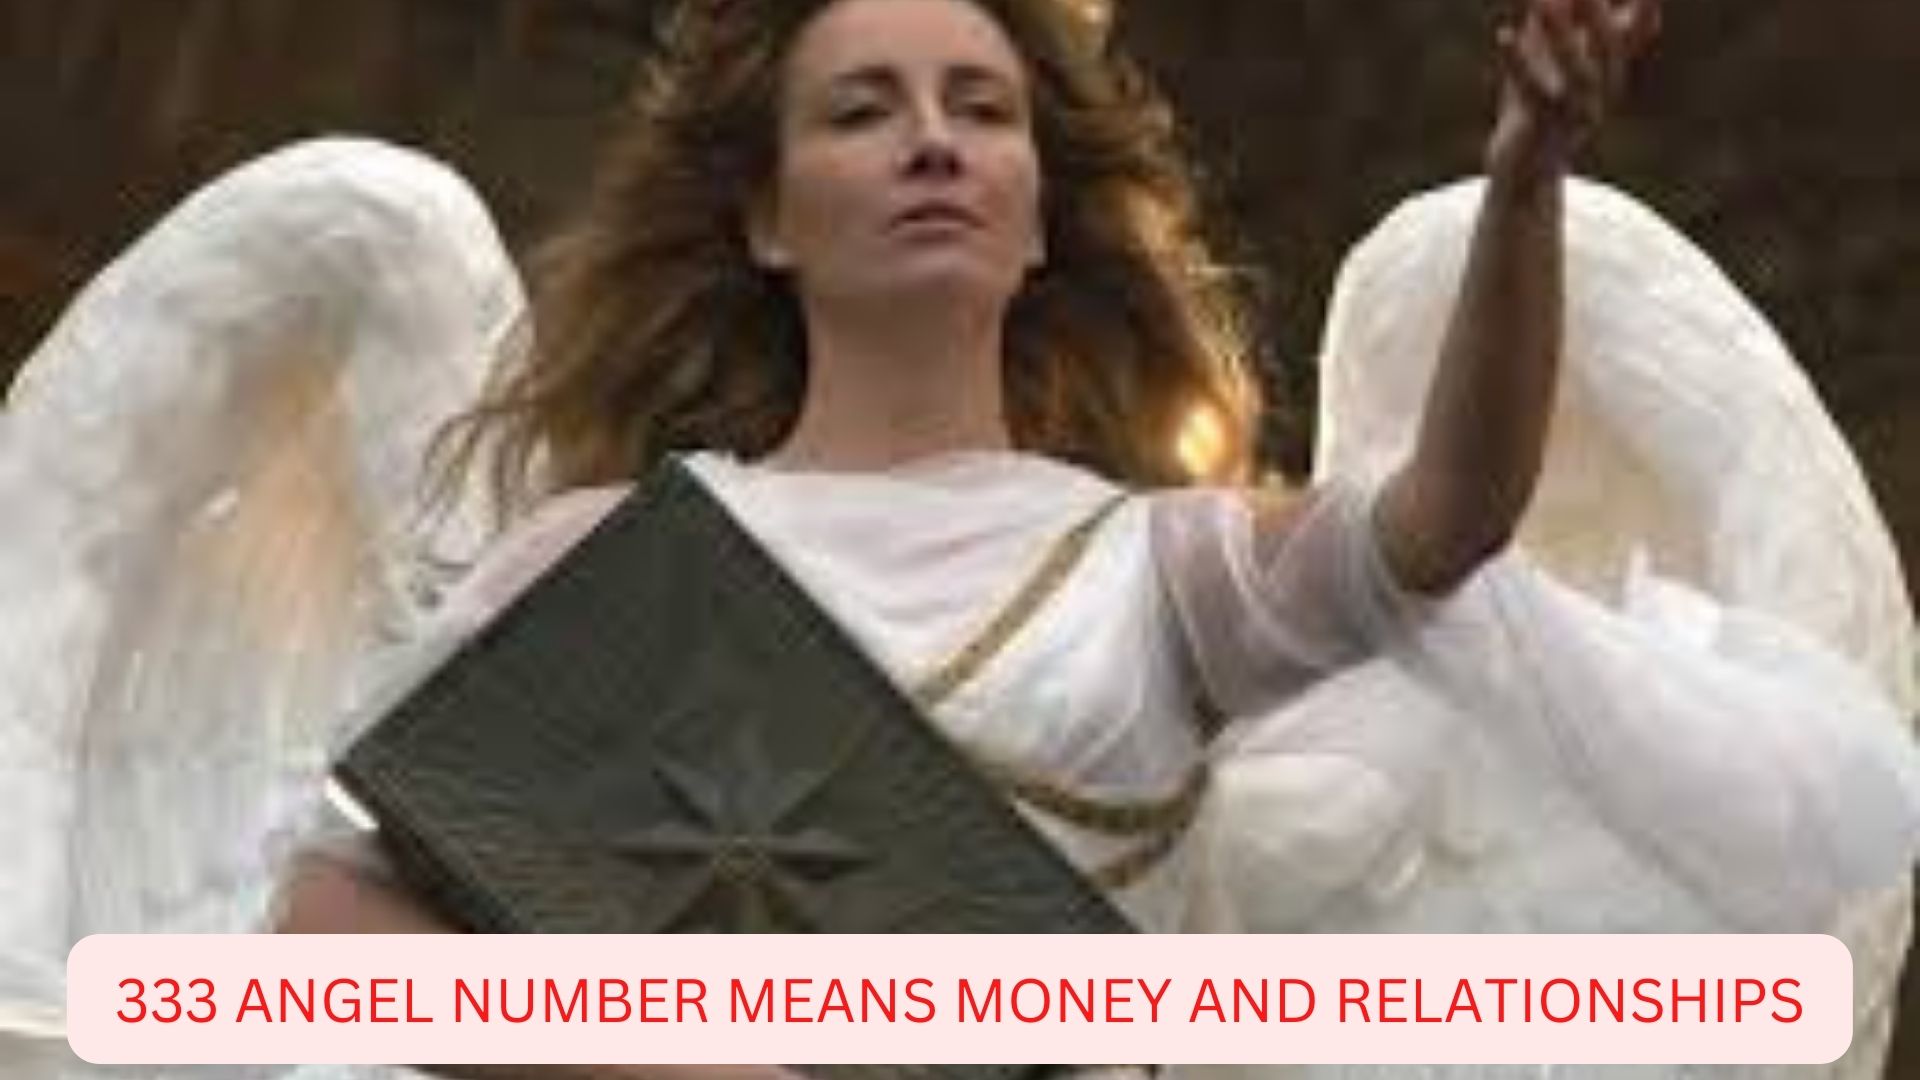 333 Angel Number Meaning - Money And Relationships